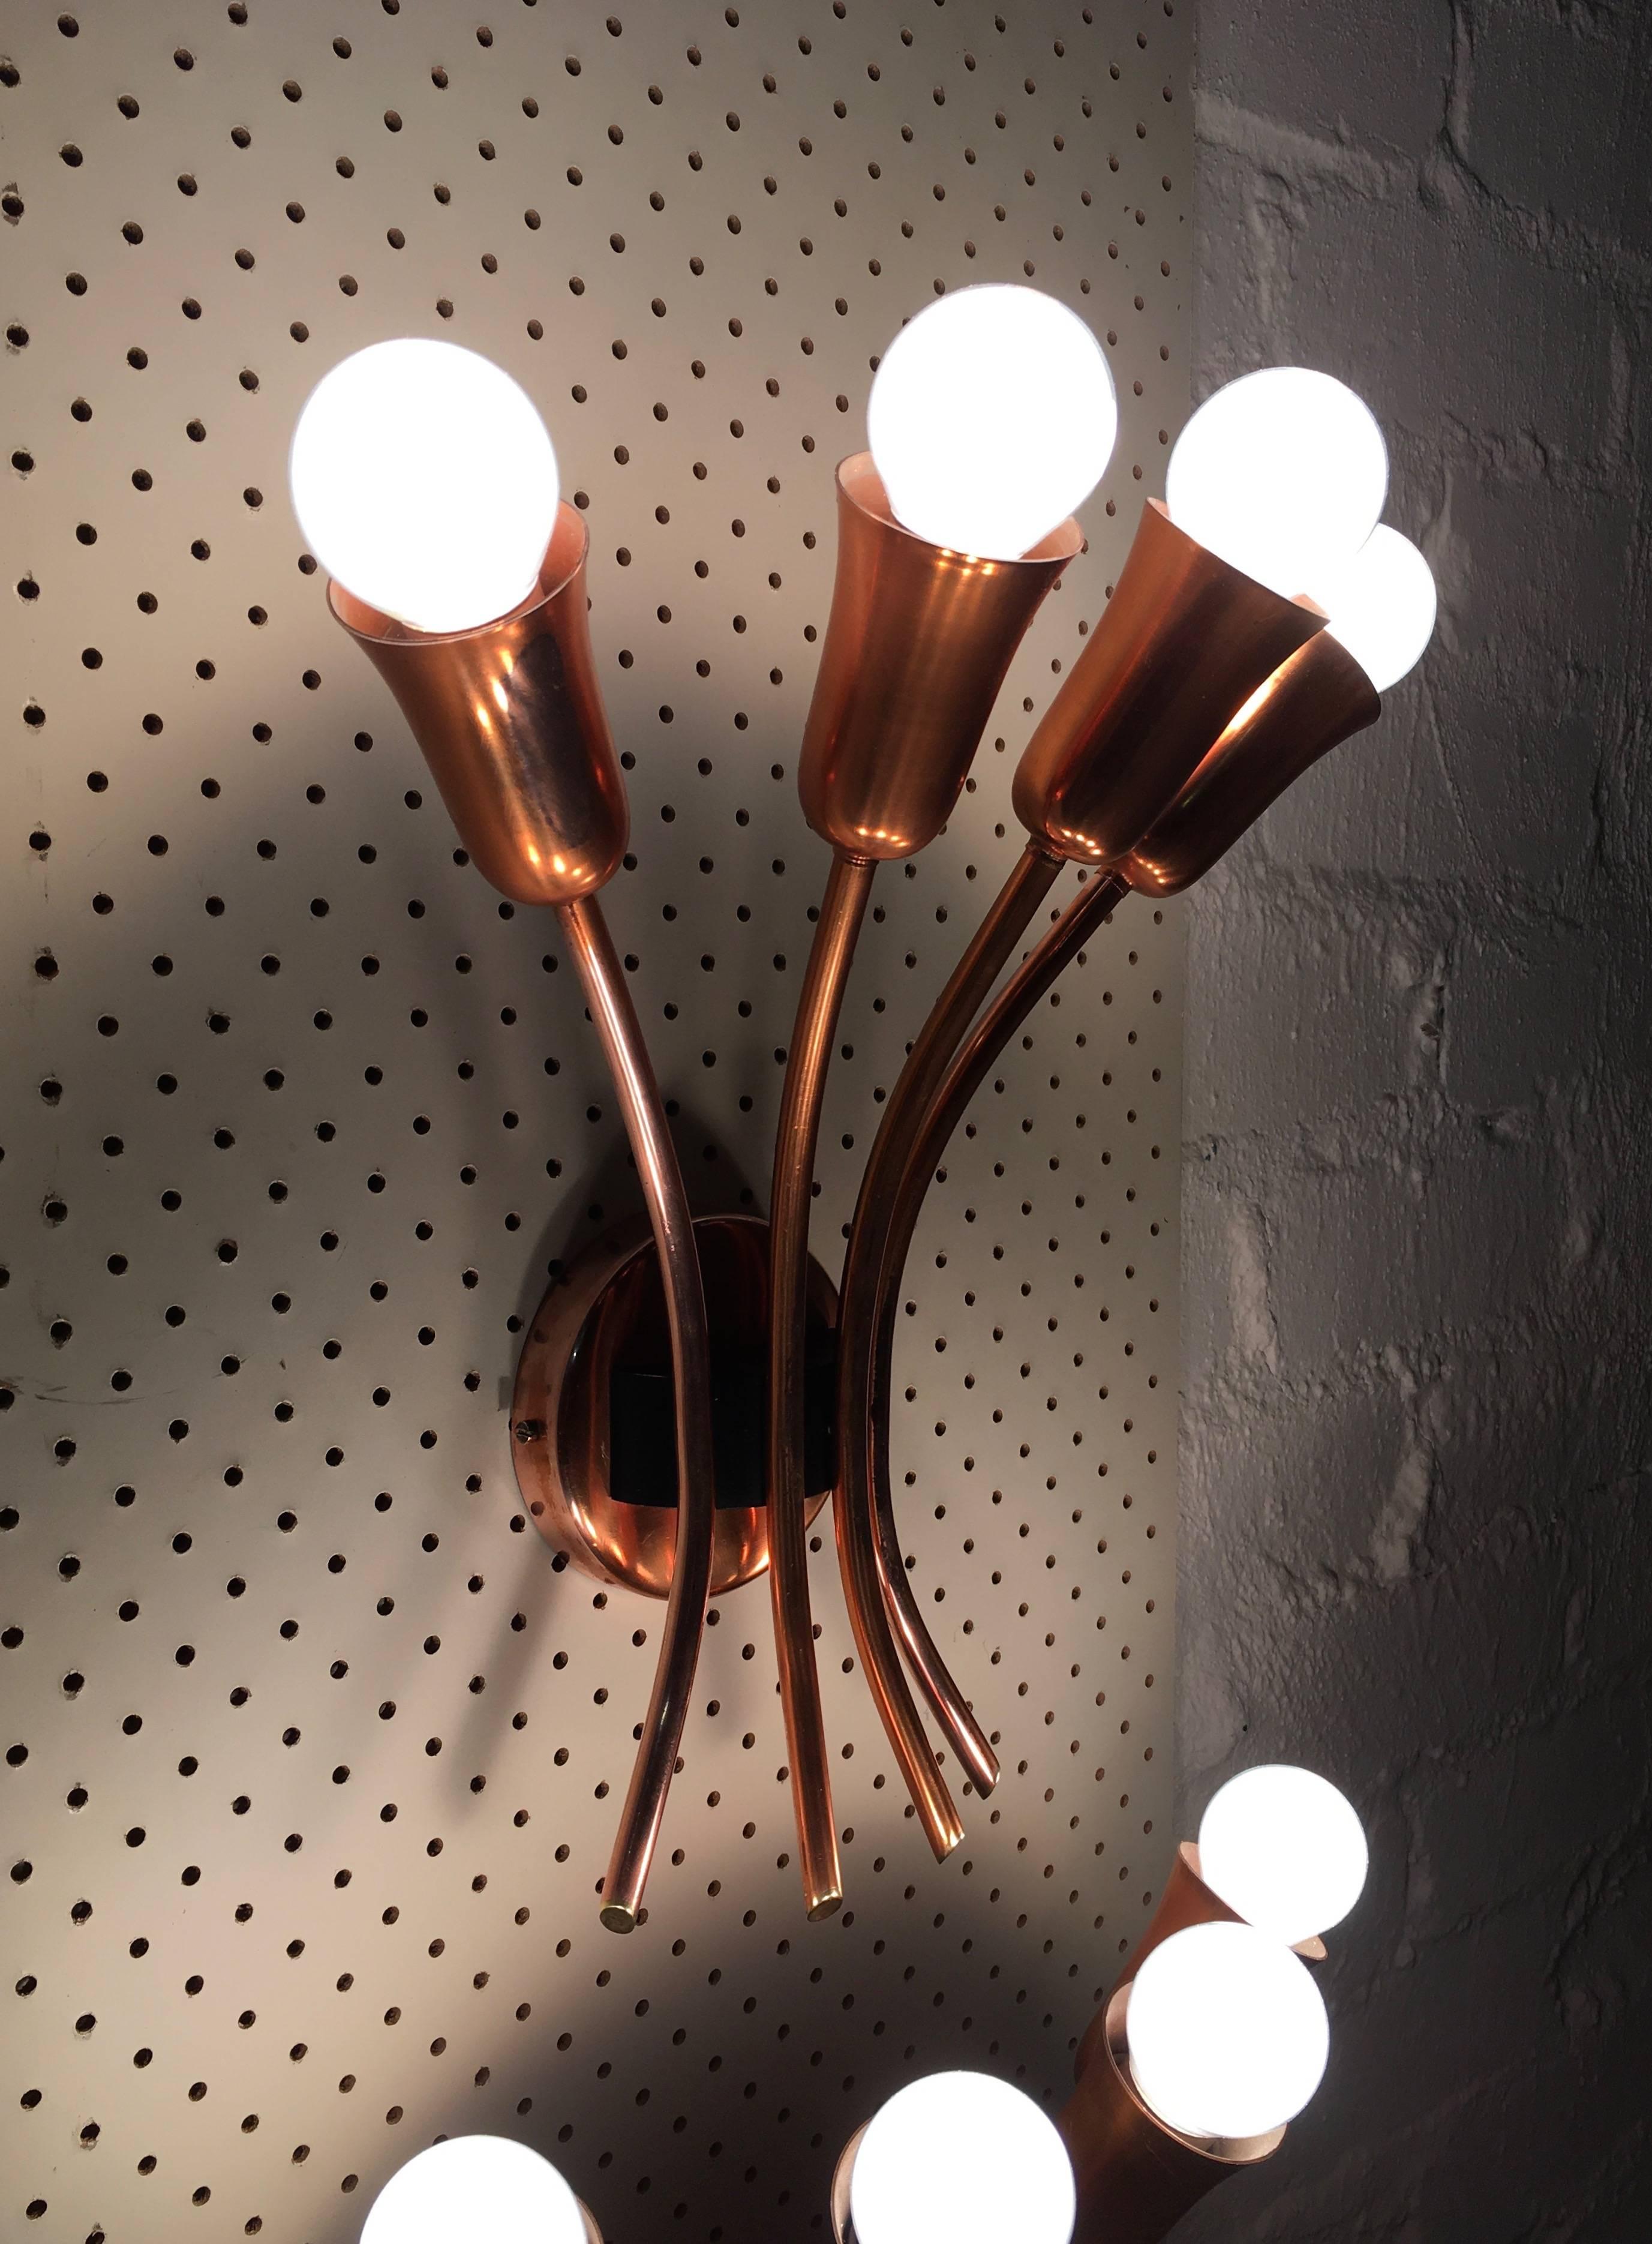 Australian Brown Evans and Co. 'BECO' Copper Wall Sconces for Anatol Kagan, Melbourne 1950s